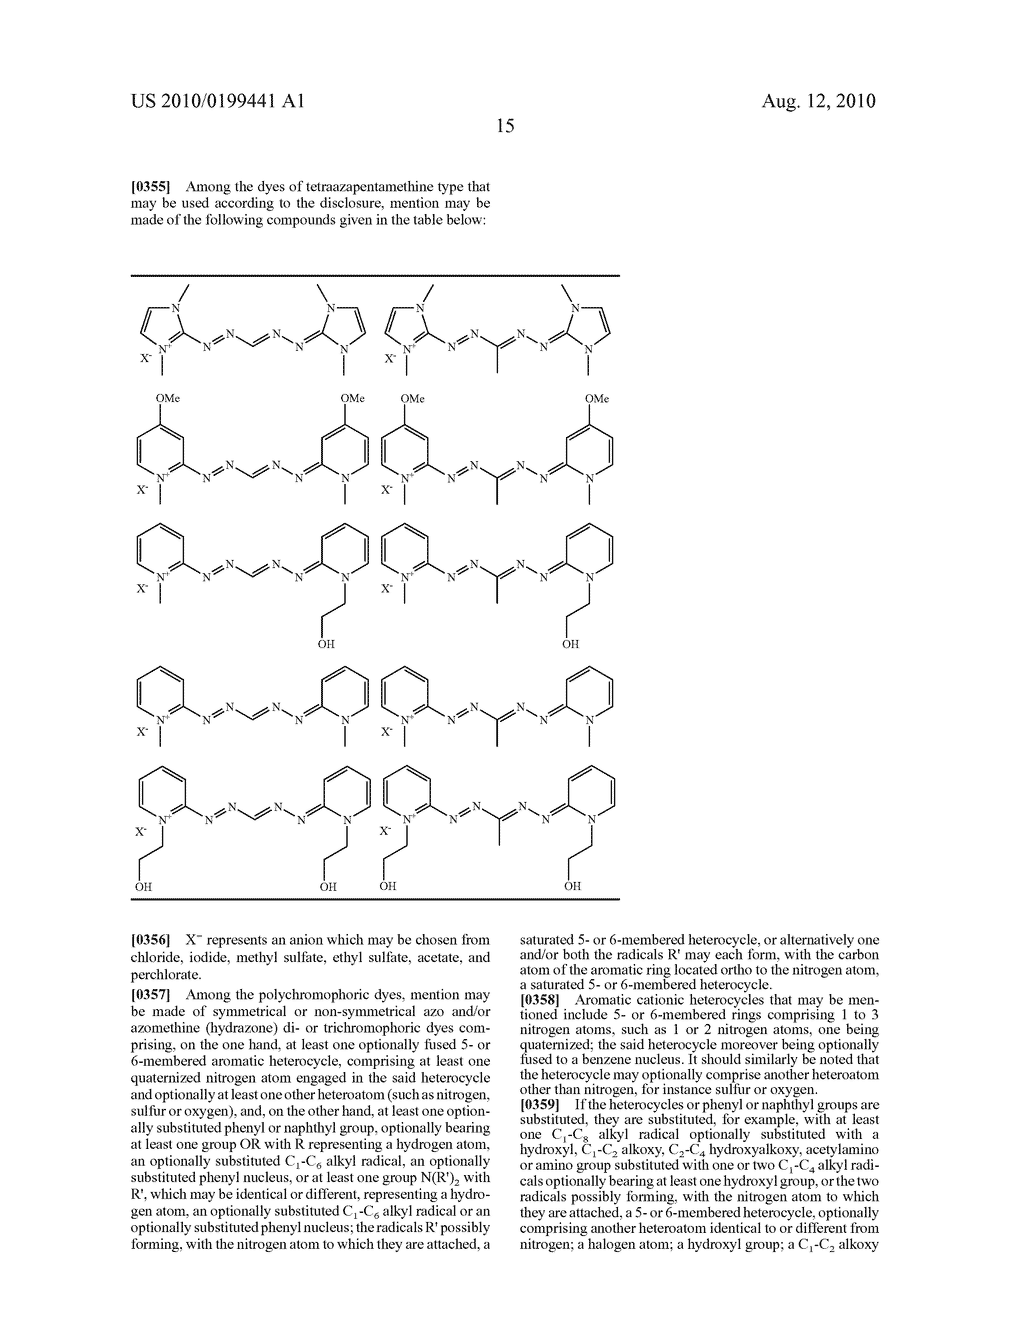 LIGHTENING AND DYEING OF HUMAN KERATIN FIBERS USING AN ANHYDROUS COMPOSITION COMPRISING A MONOETHYANOLAMINE/BASIC AMINO ACID MIXTURE, AND DEVICE THEREFOR - diagram, schematic, and image 16